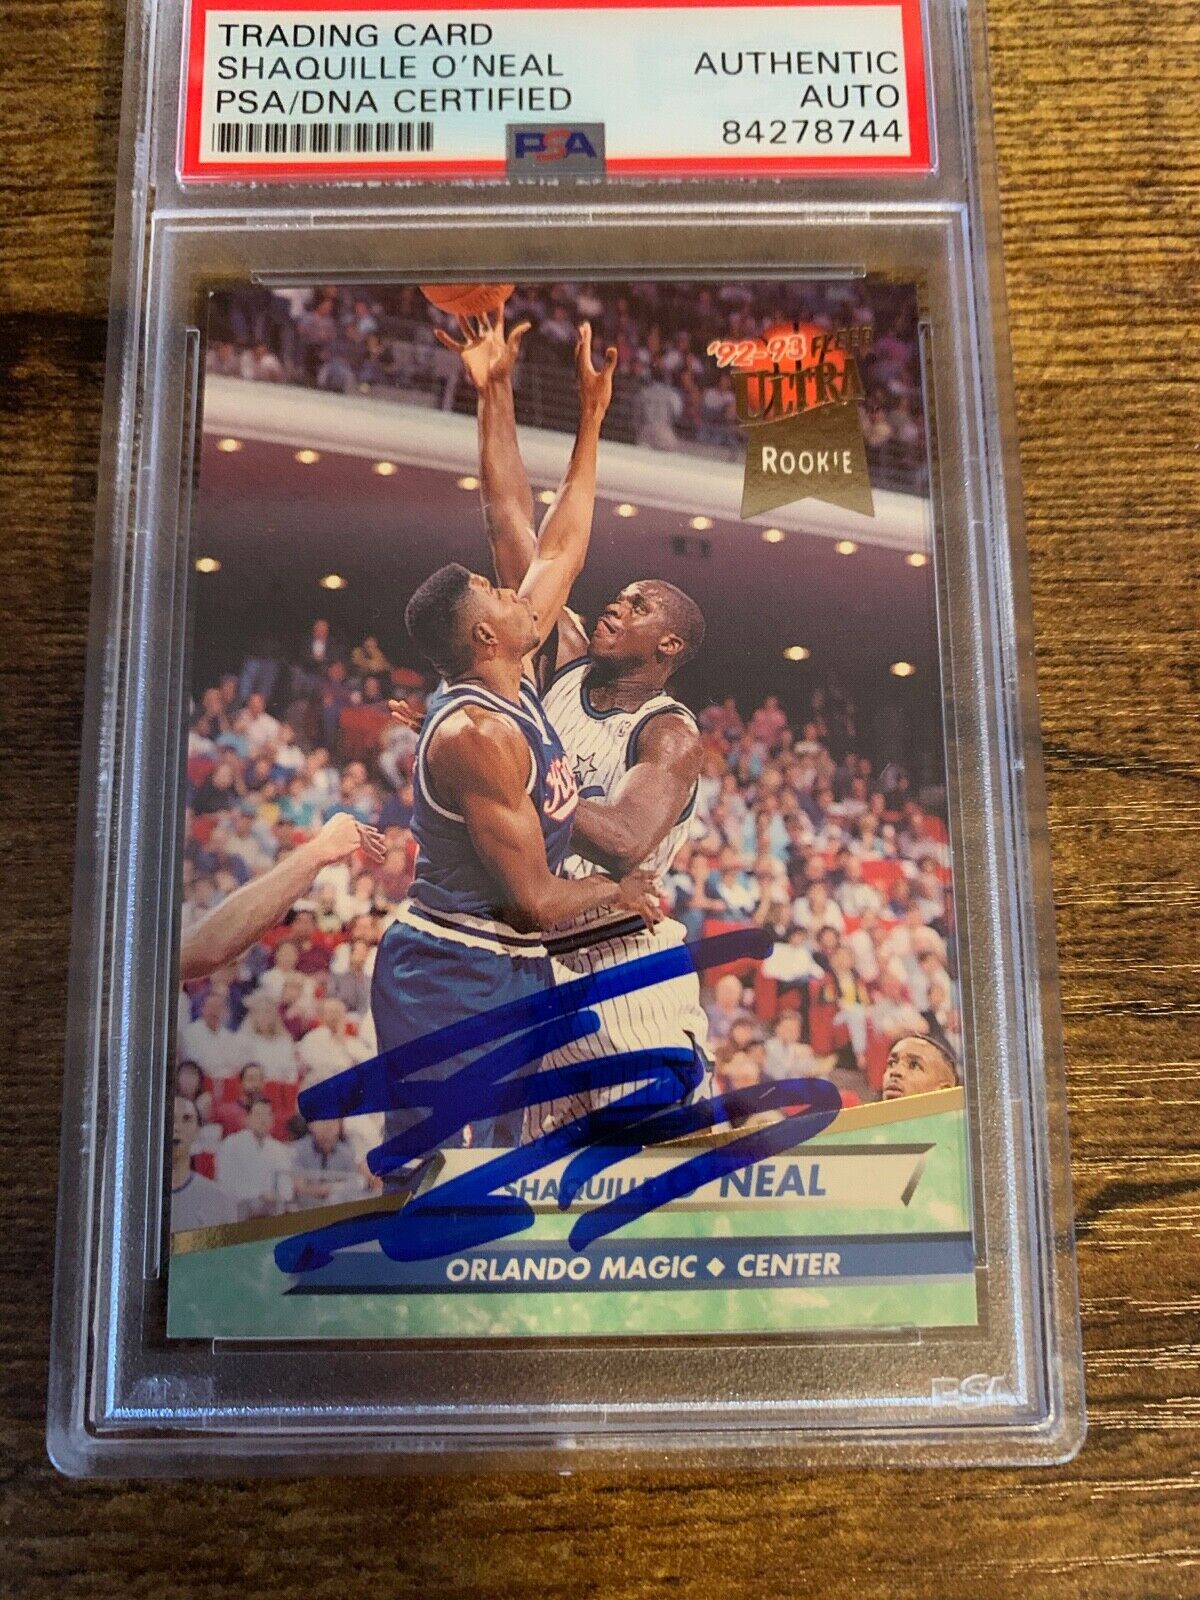 Shaquille O Neal Autographed 1992 Fleer Ultra Rookie Card PSA Certified Slabbed